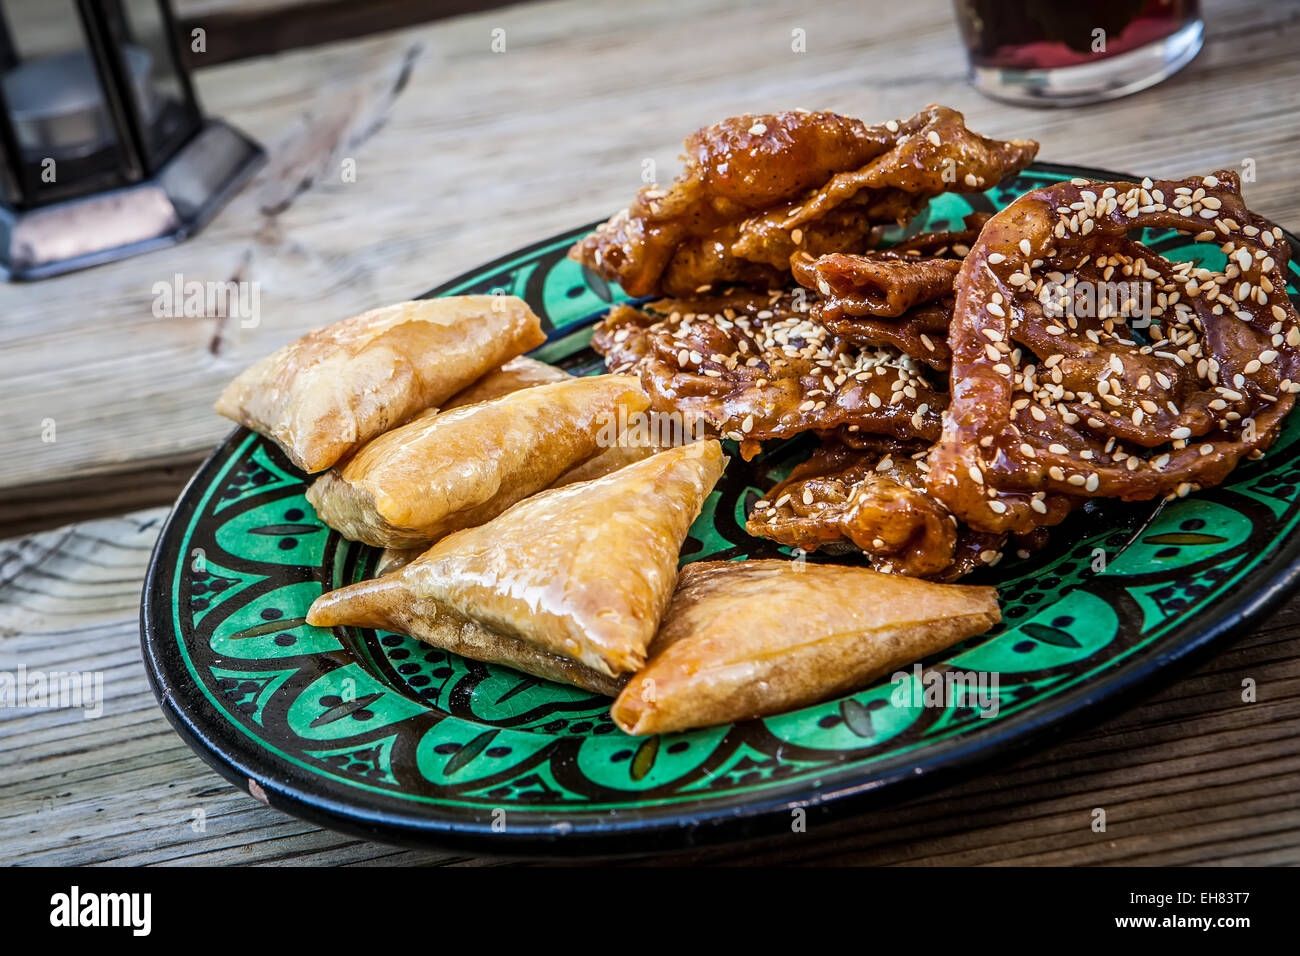 traditional honey and almond sweet pastries from morocco Stock Photo